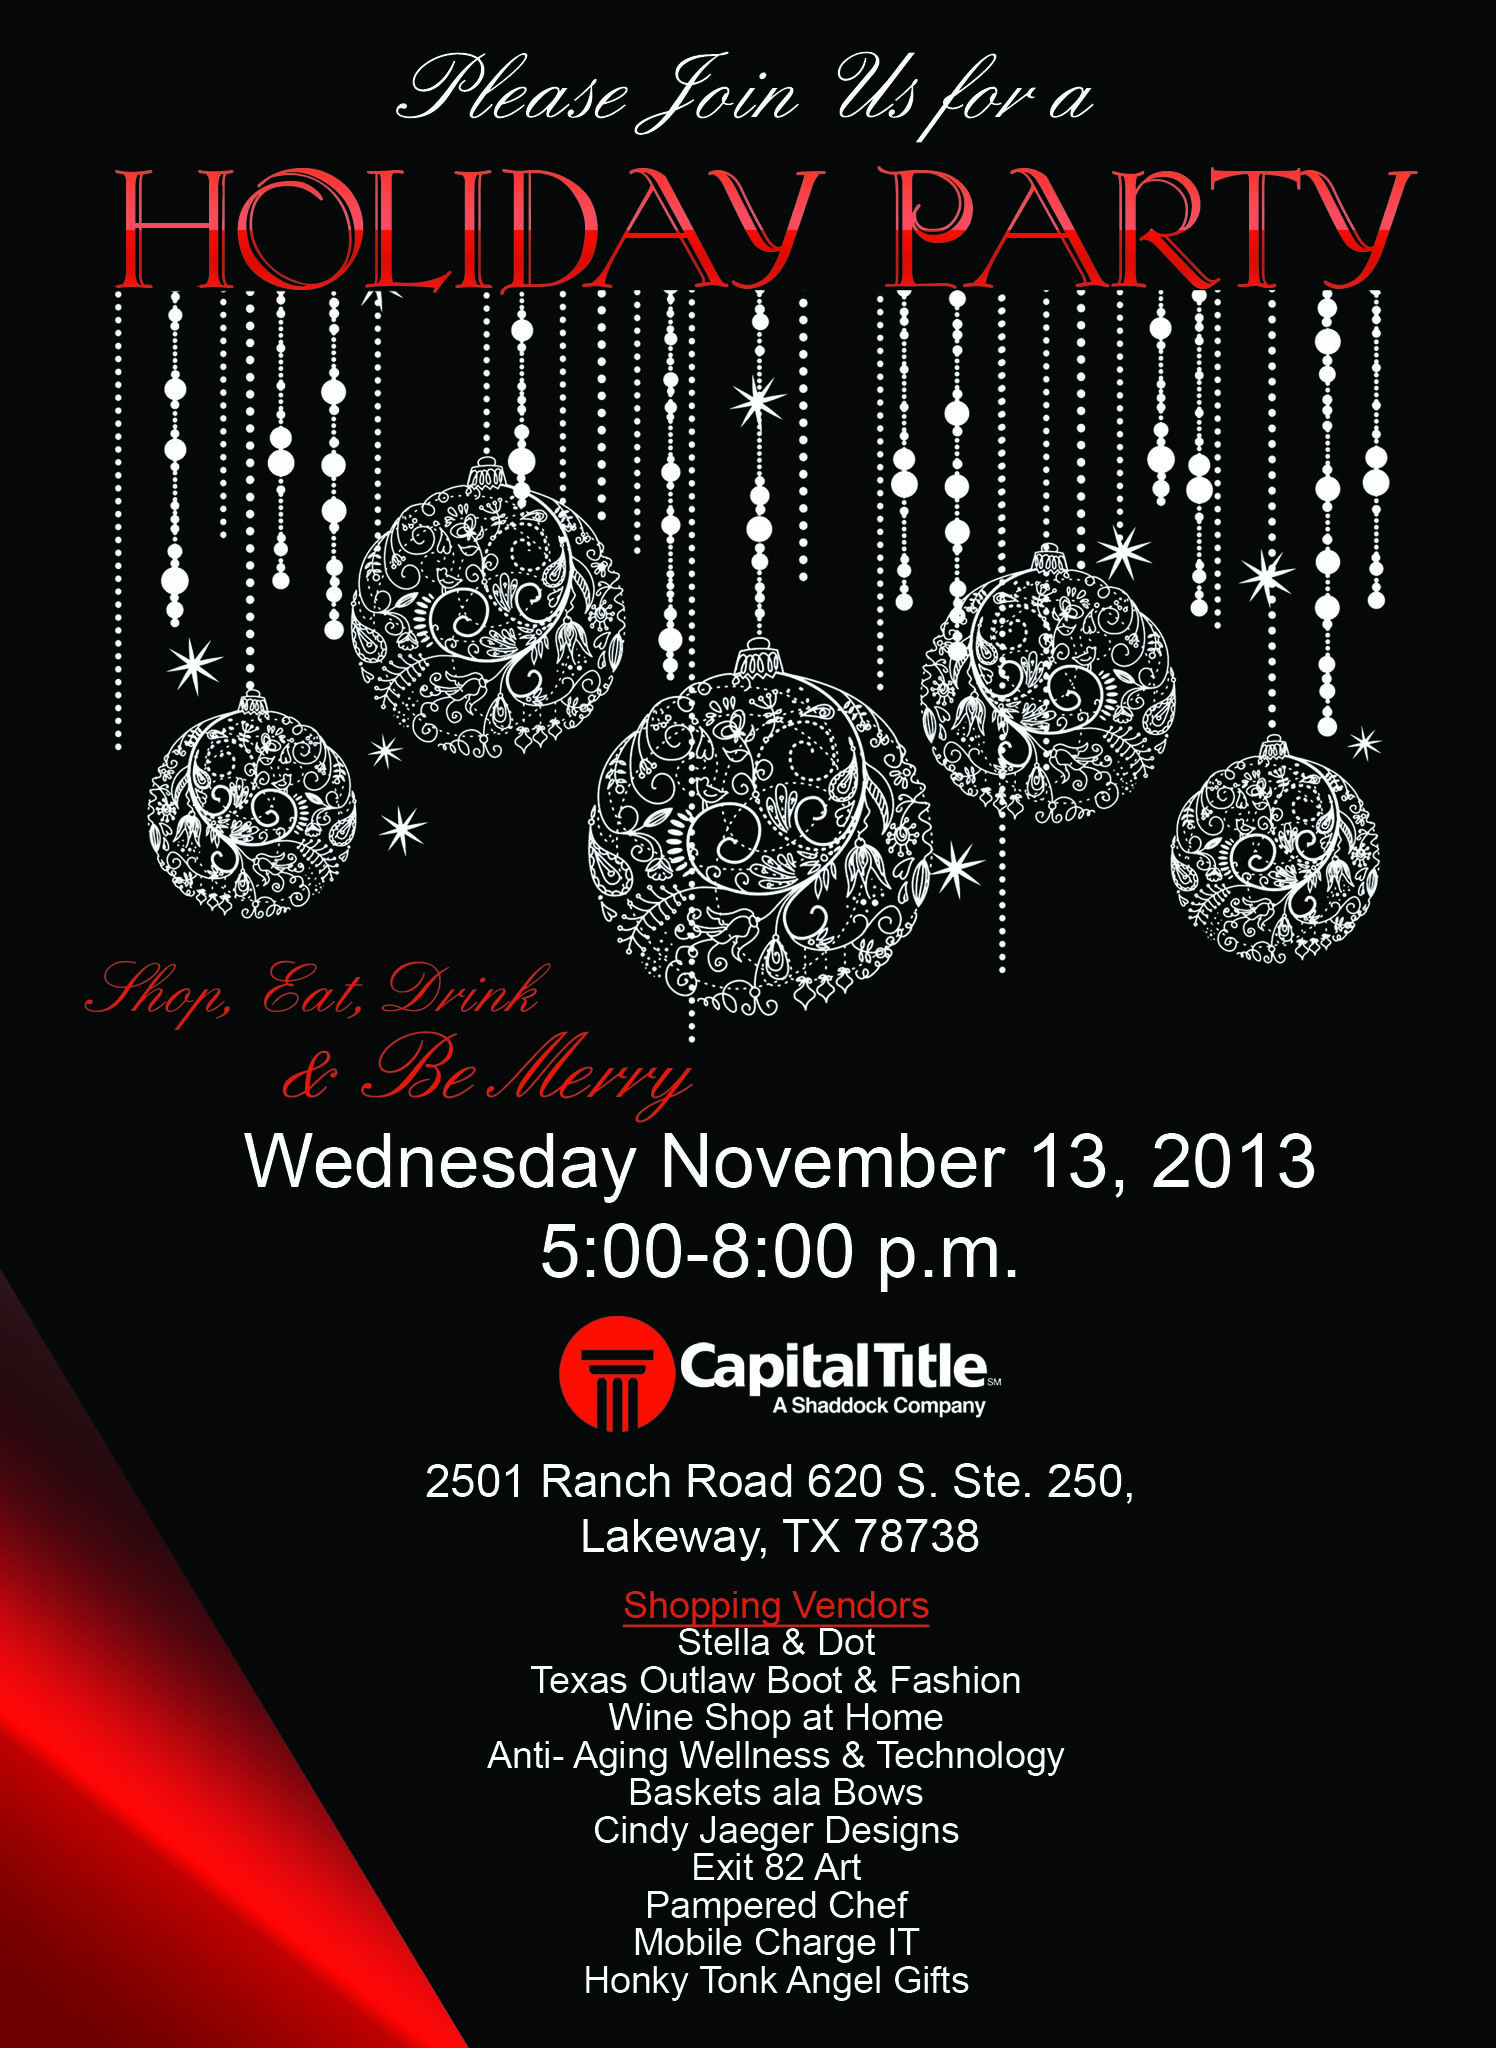 CTOT Holiday Party